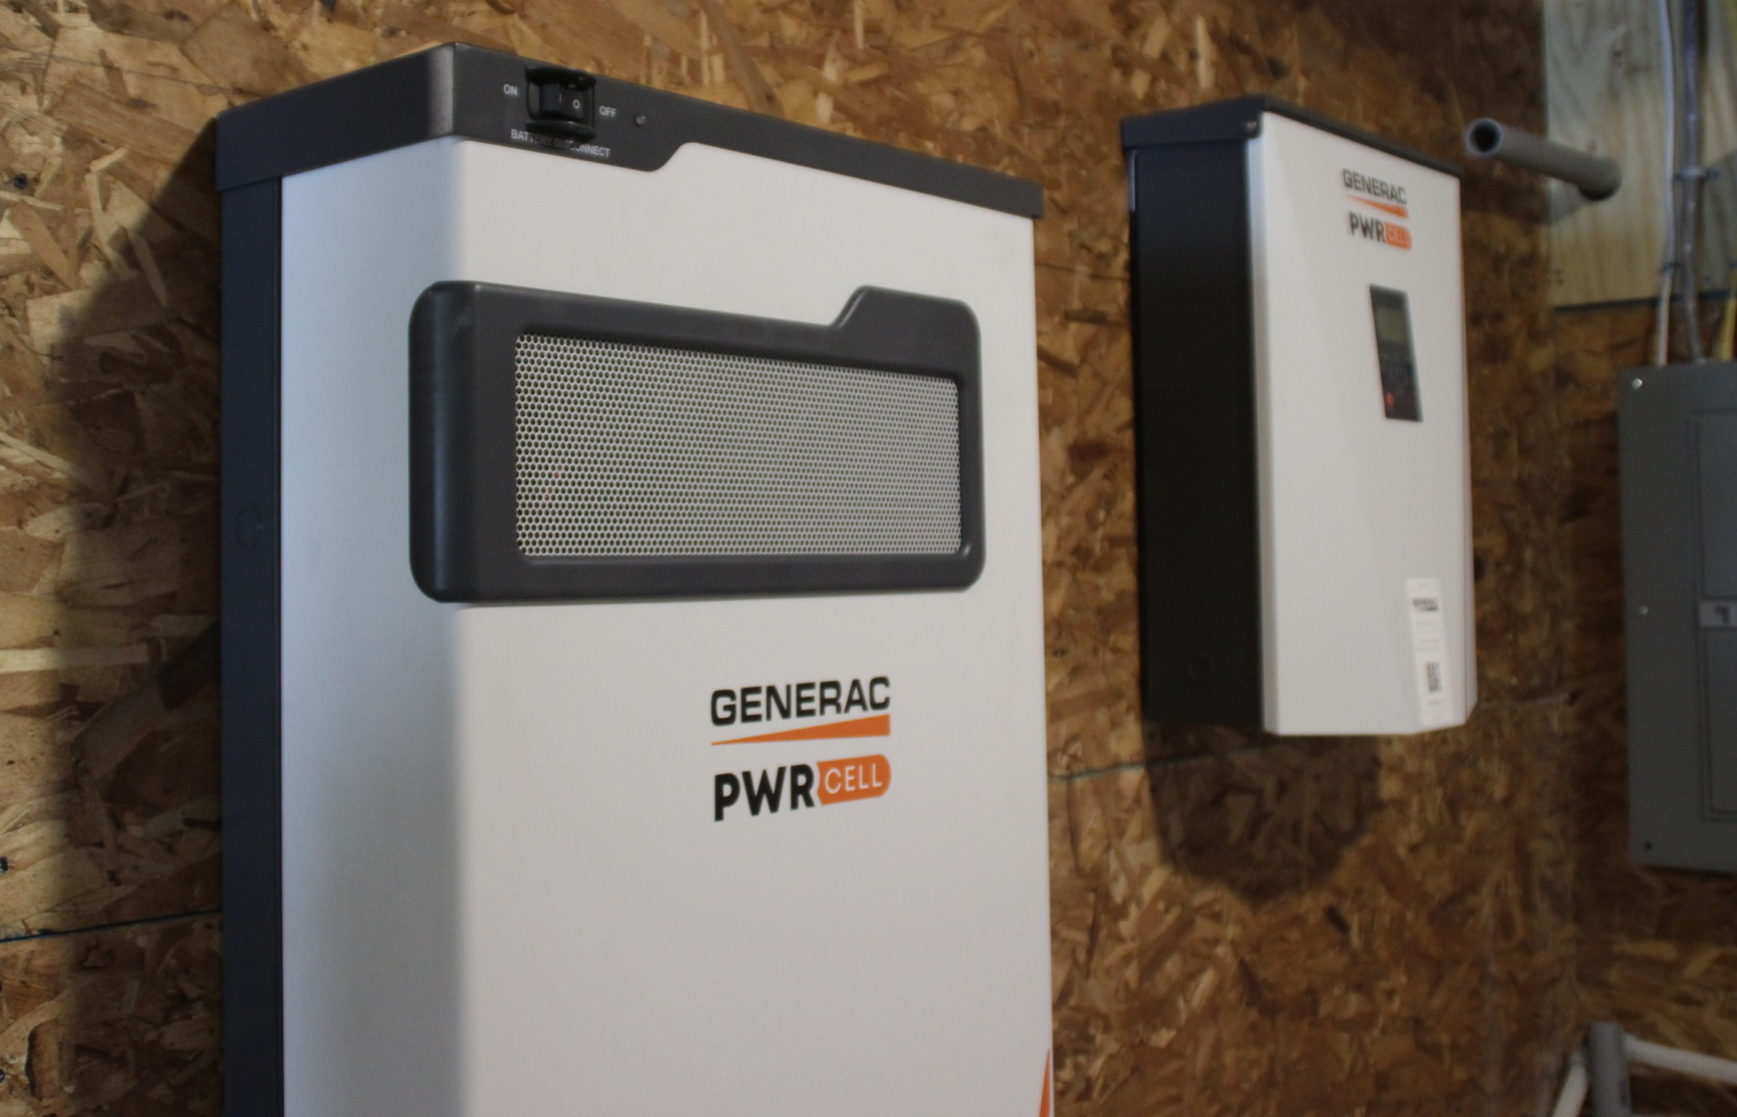 Generac PwrCell attached to the interior walls of a home in Vermont after a solar panel installation by Building Energy